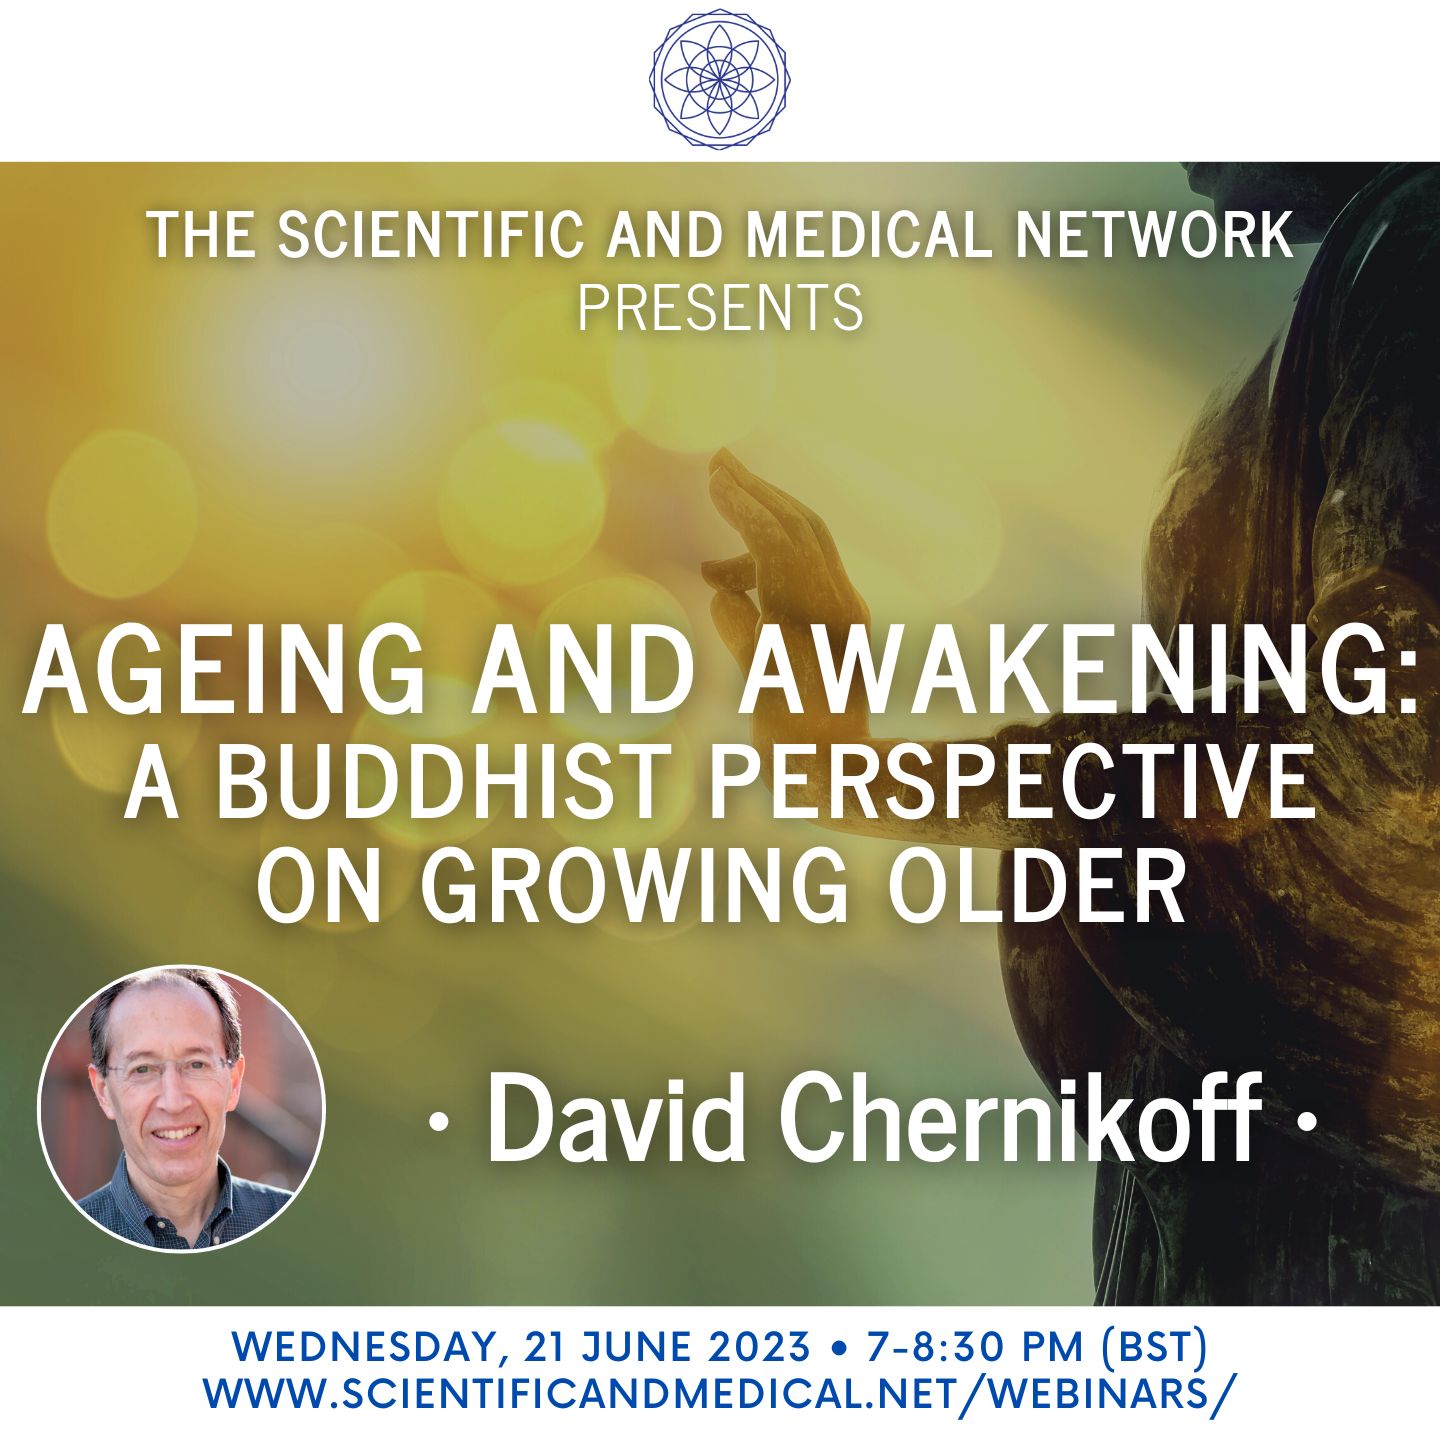 David Chernikoff – Ageing and Awakening A Buddhist Perspective on Growing Older